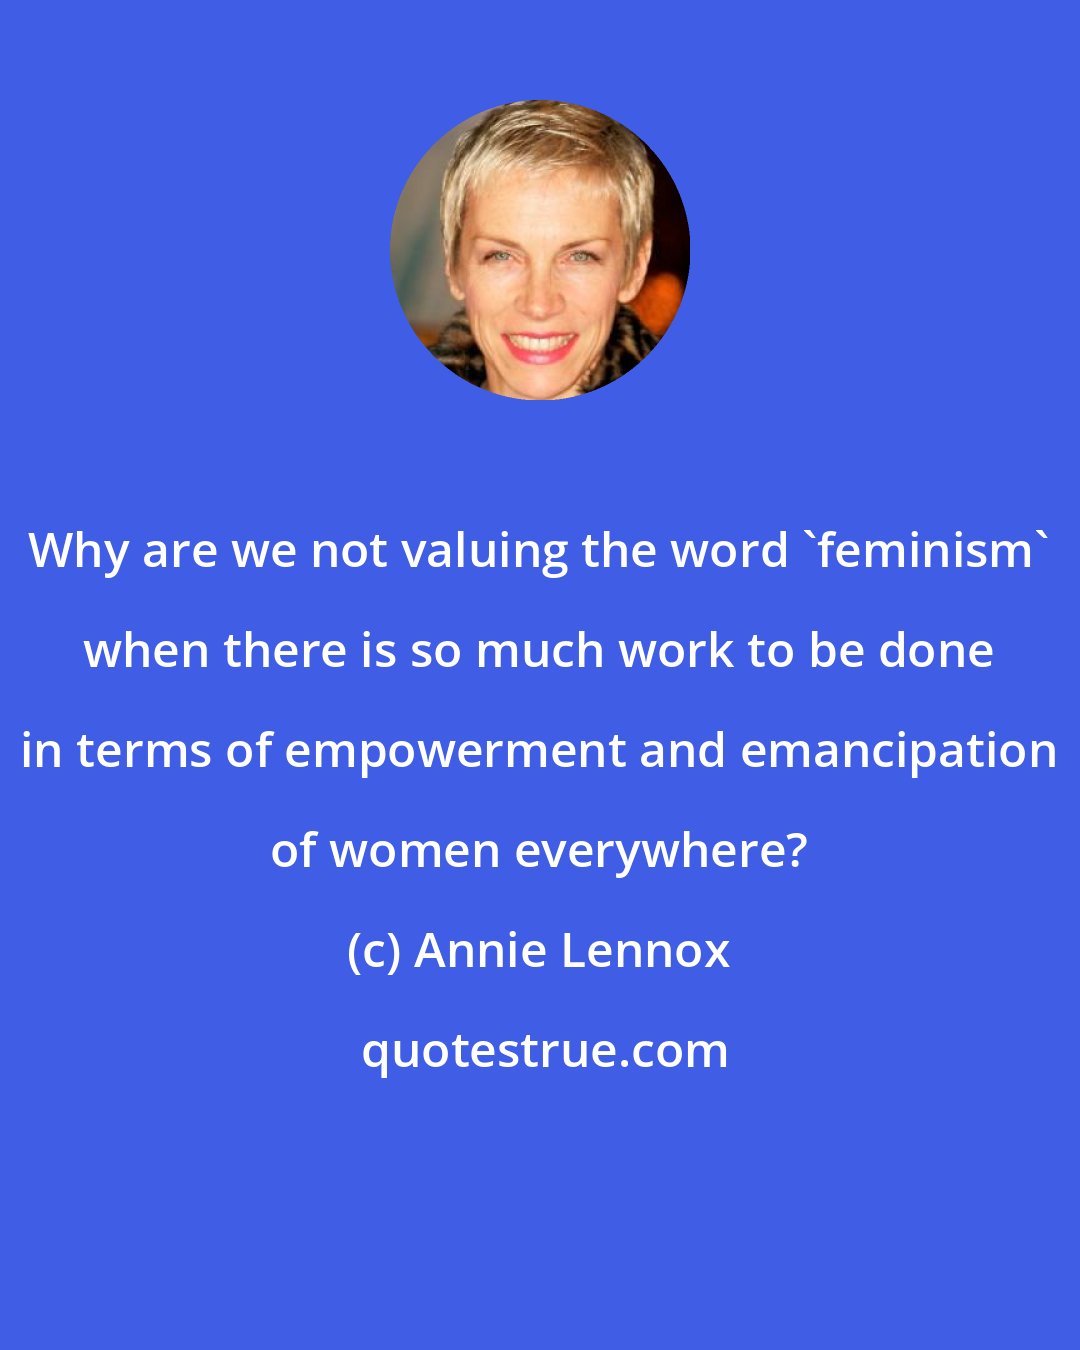 Annie Lennox: Why are we not valuing the word 'feminism' when there is so much work to be done in terms of empowerment and emancipation of women everywhere?